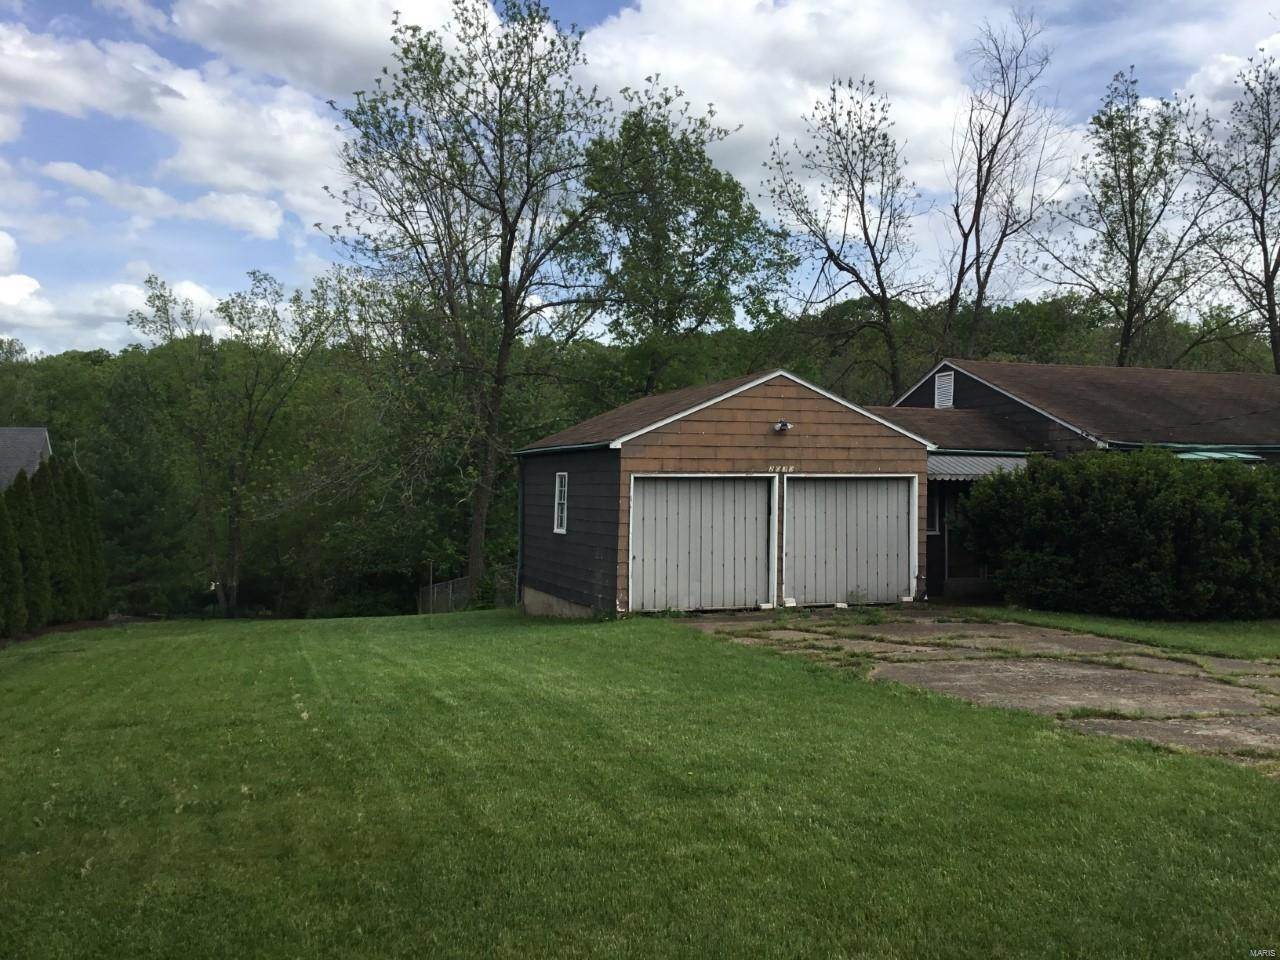 Property for Sale at 2030 Clarkson Road Chesterfield, Missouri 63017 United States